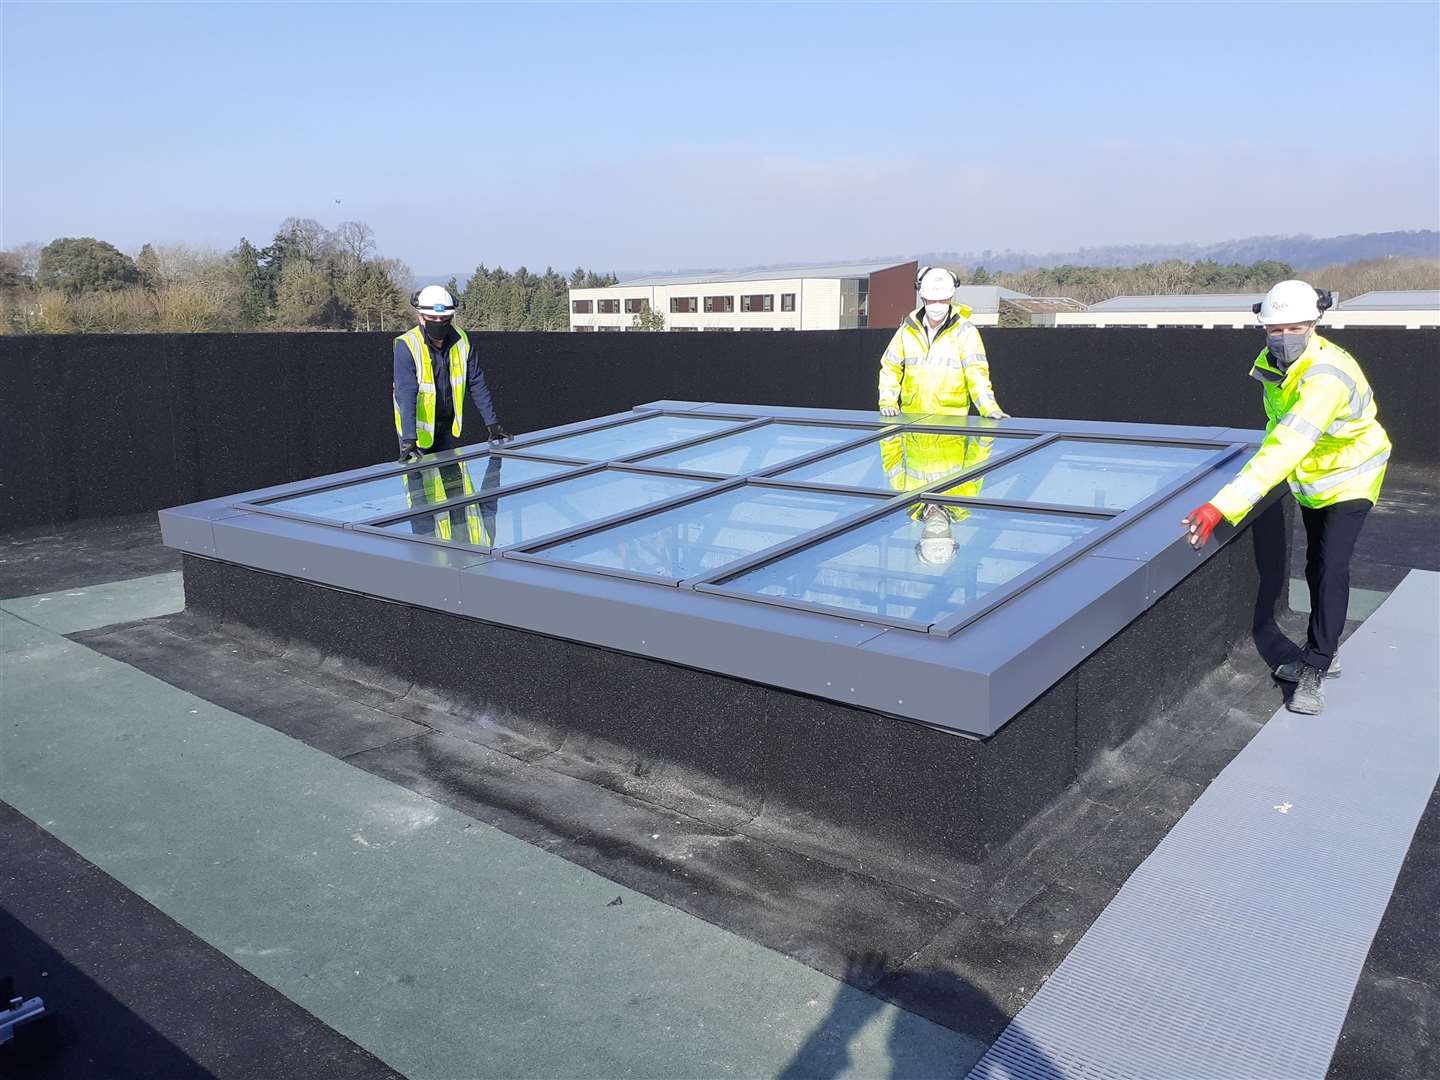 Rydon staff complete the Maidstone Innovation Centre's highest point